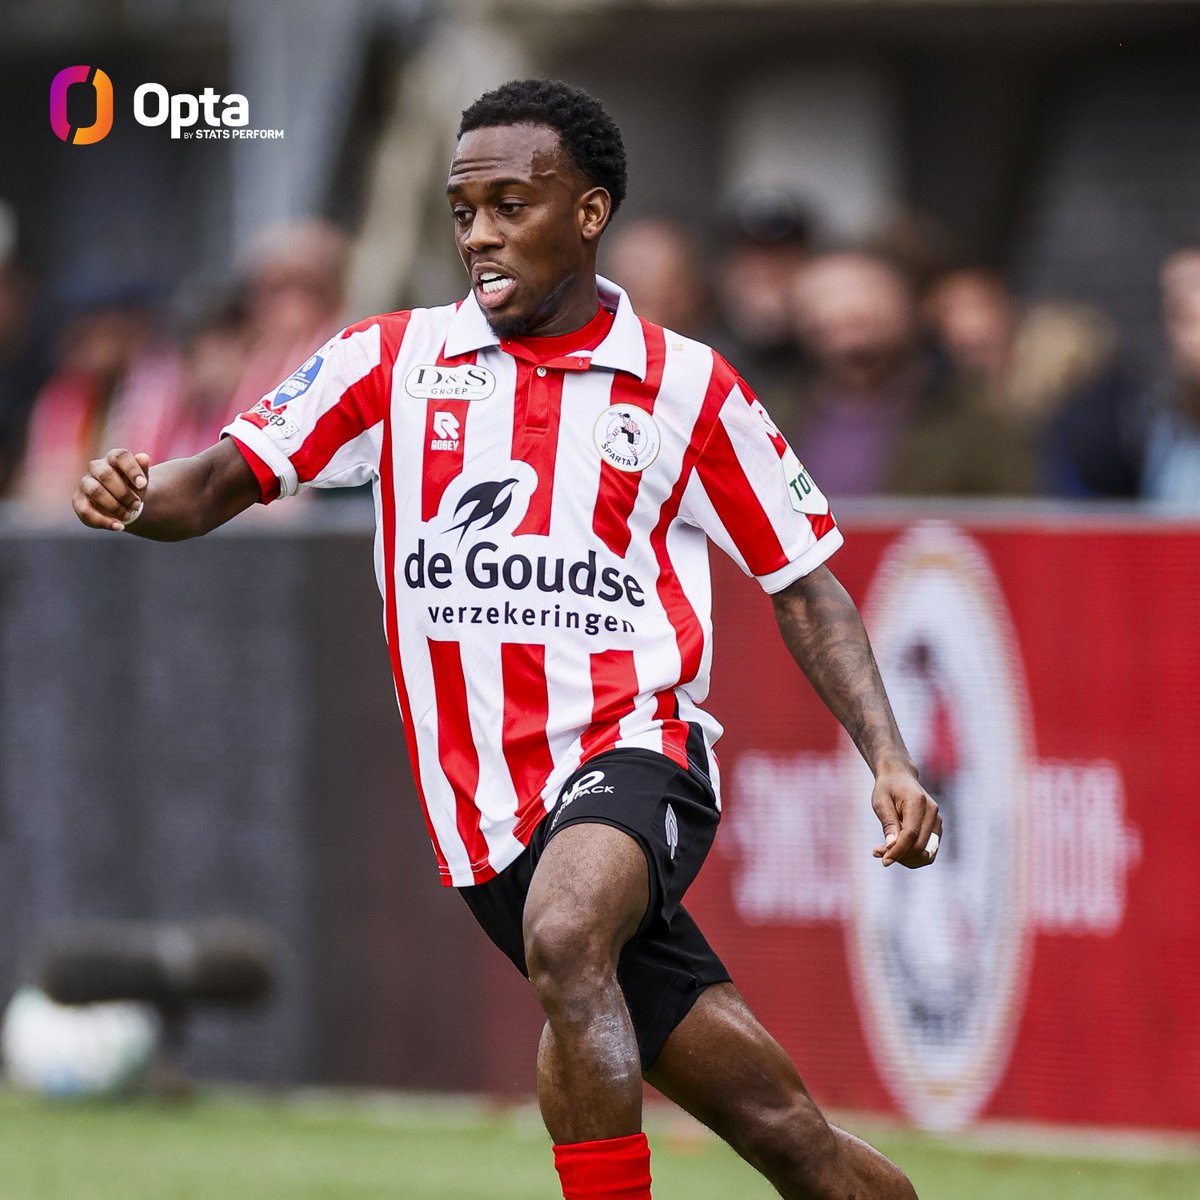 5 - Djevencio van der Kust assisted five goals this Eredivisie season, more than any other @SpartaRotterdam defender in an Eredivisie campaign this century. Kiss.